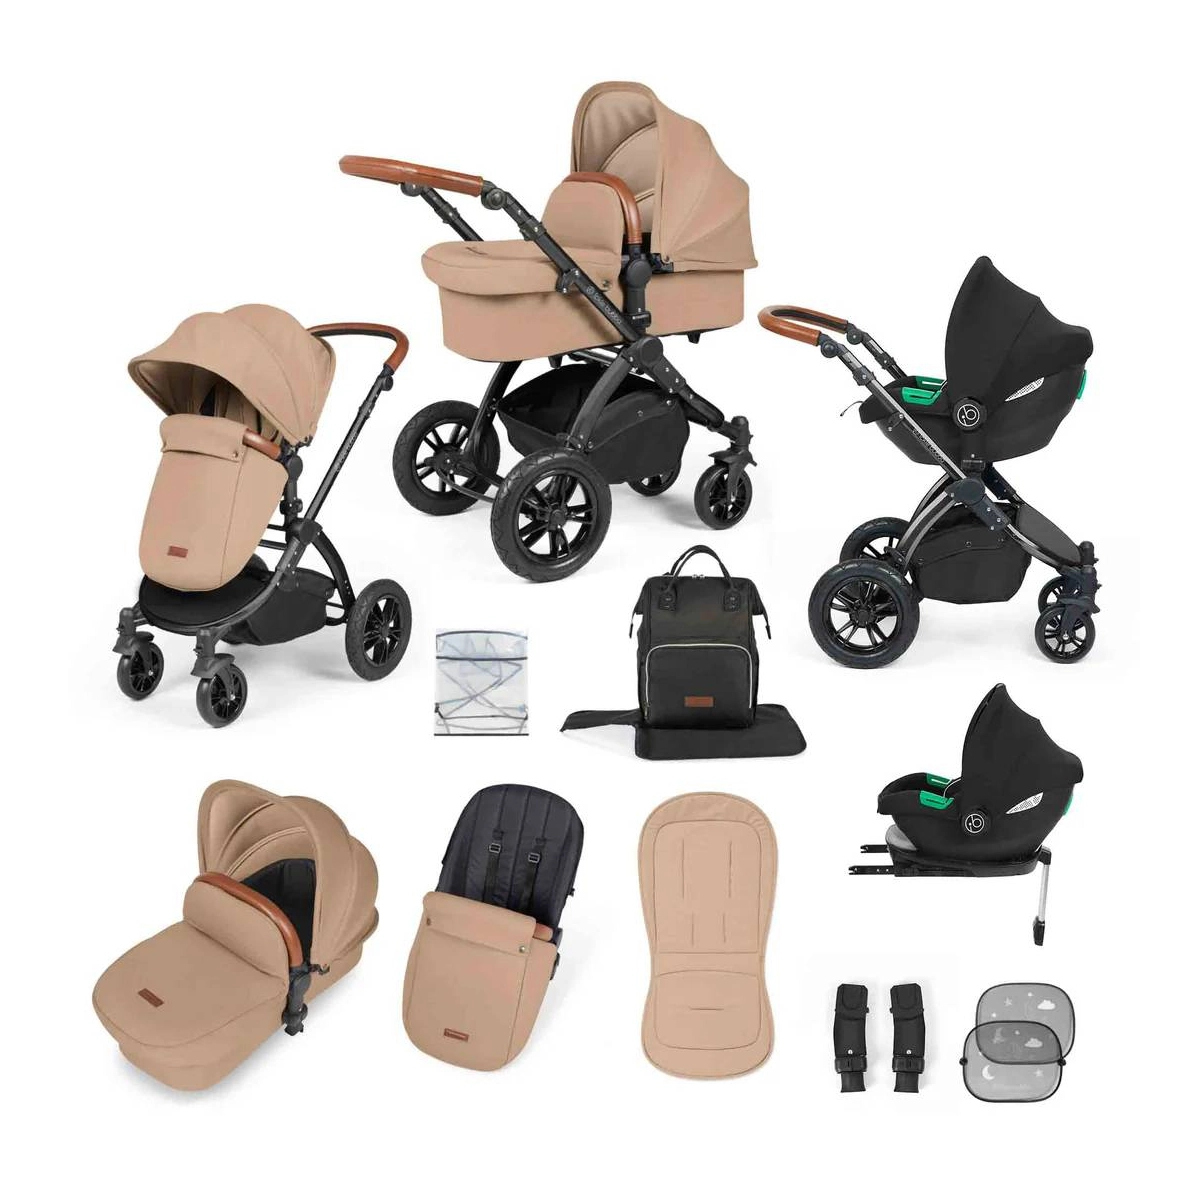 Ickle Bubba Stomp Luxe Black Frame Travel System with Cirrus i-Size Carseat & Isofix Base